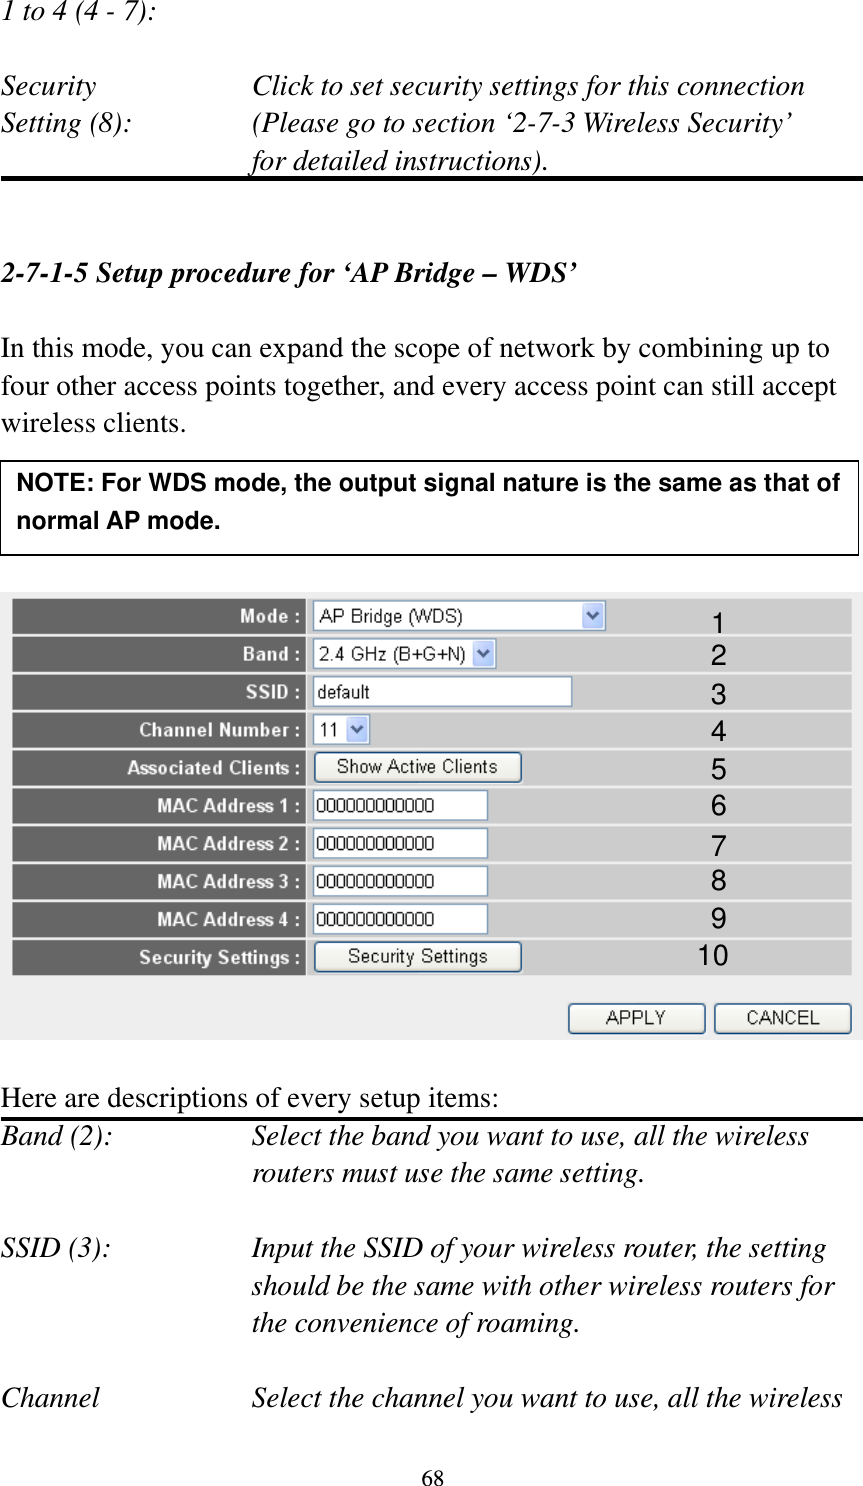 68 1 to 4 (4 - 7):    Security    Click to set security settings for this connection Setting (8):  (Please go to section ‘2-7-3 Wireless Security’   for detailed instructions).   2-7-1-5 Setup procedure for ‘AP Bridge – WDS’  In this mode, you can expand the scope of network by combining up to four other access points together, and every access point can still accept wireless clients.       Here are descriptions of every setup items: Band (2):  Select the band you want to use, all the wireless routers must use the same setting.  SSID (3):  Input the SSID of your wireless router, the setting should be the same with other wireless routers for the convenience of roaming.  Channel  Select the channel you want to use, all the wireless 1 2 3 4 5 7 8 6 9 10 NOTE: For WDS mode, the output signal nature is the same as that of normal AP mode. 